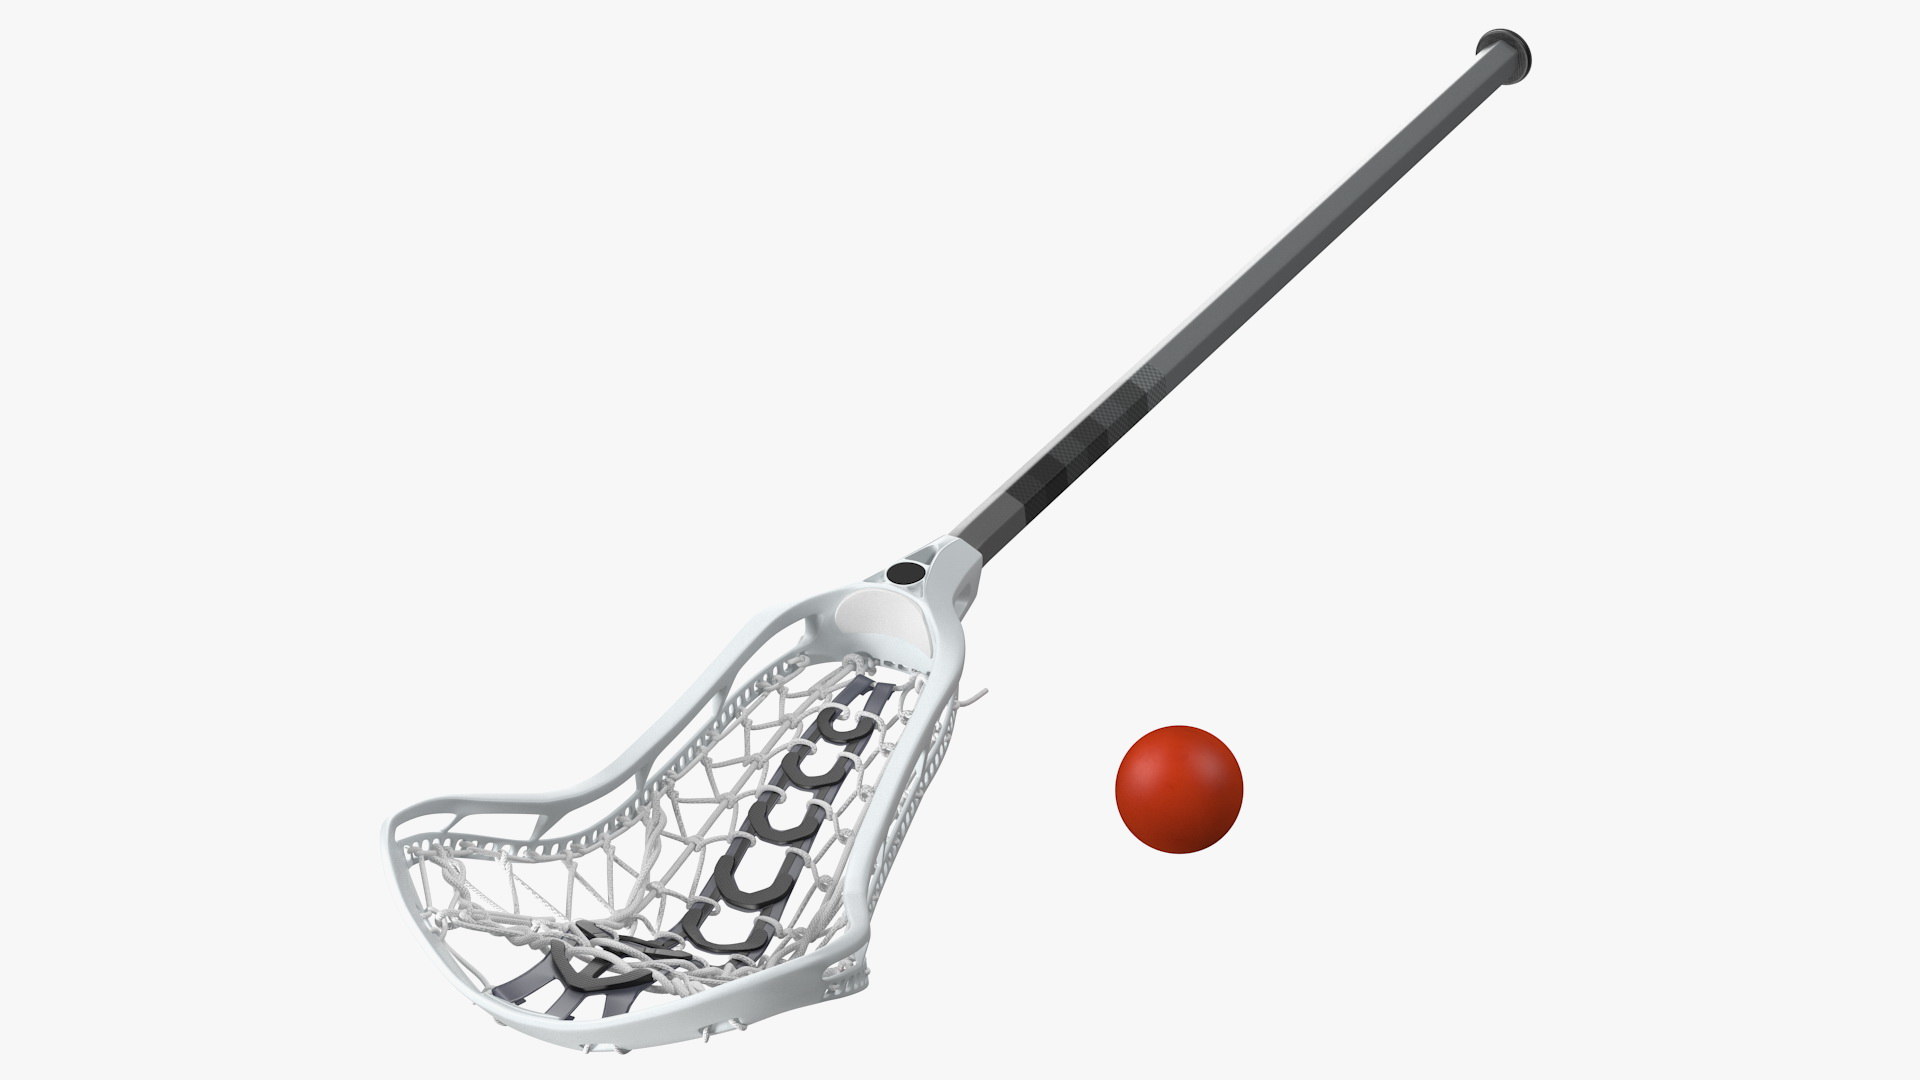 LacrosseStickwithBall3dsmodel001 3467844B 433C 487B BC2A AE2D7D39F546Default 